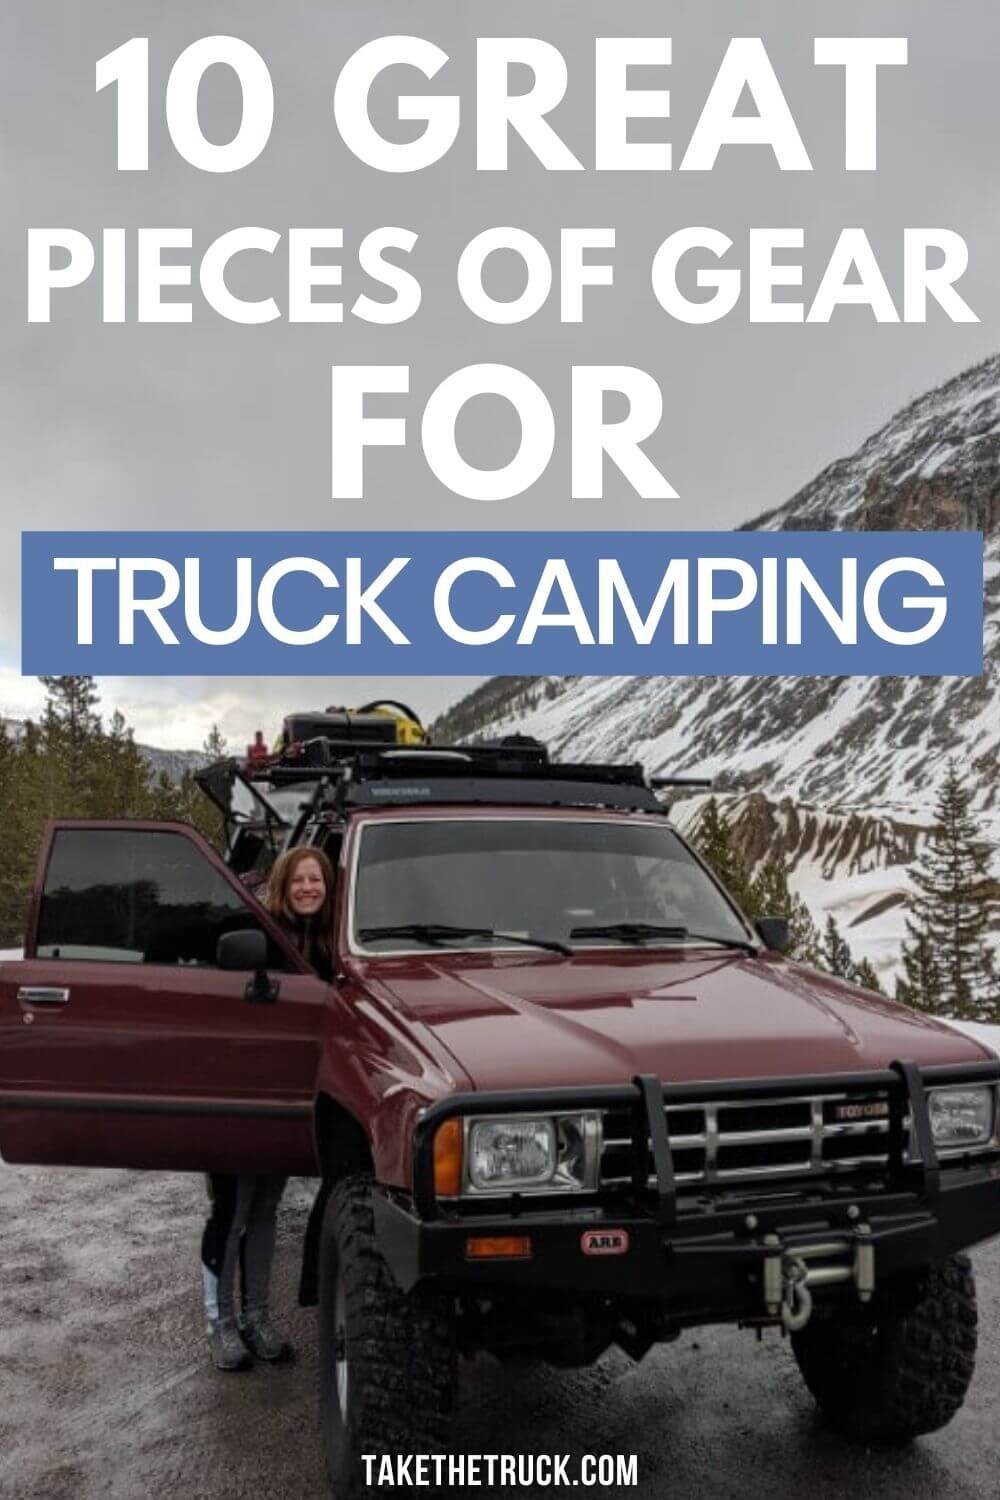 Our top 10 truck camping accessories and truck bed camping gear or overland truck gear that we recommend, whether you’re new to pickup truck camping or an old pro!